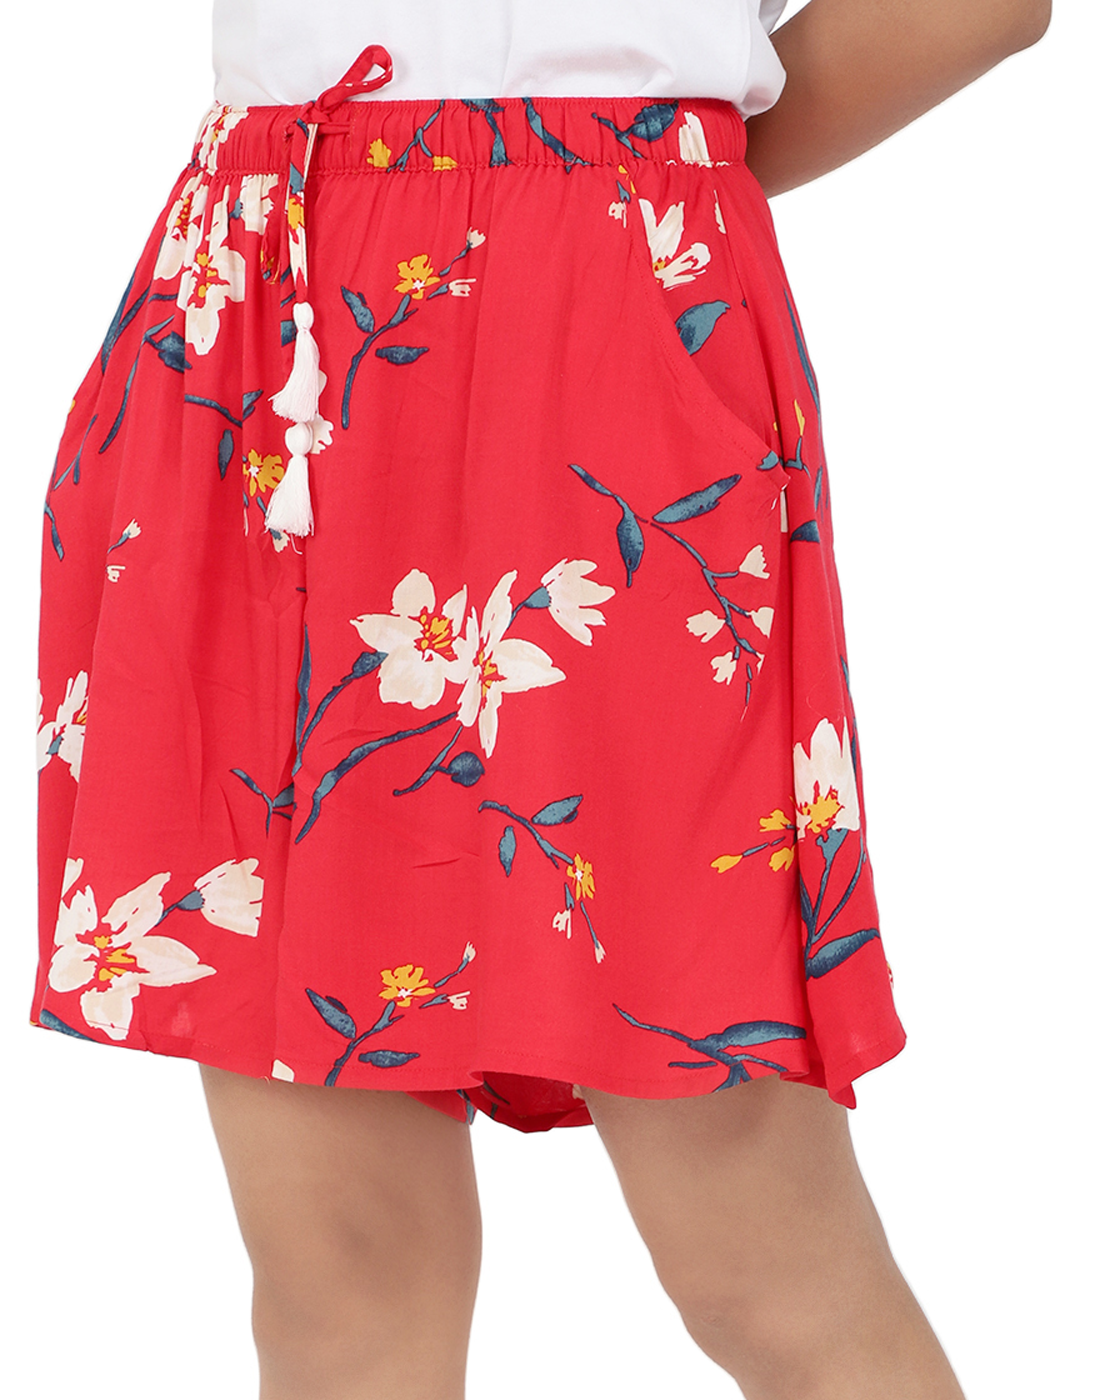 Culotte Shorts for Women-Red Floral